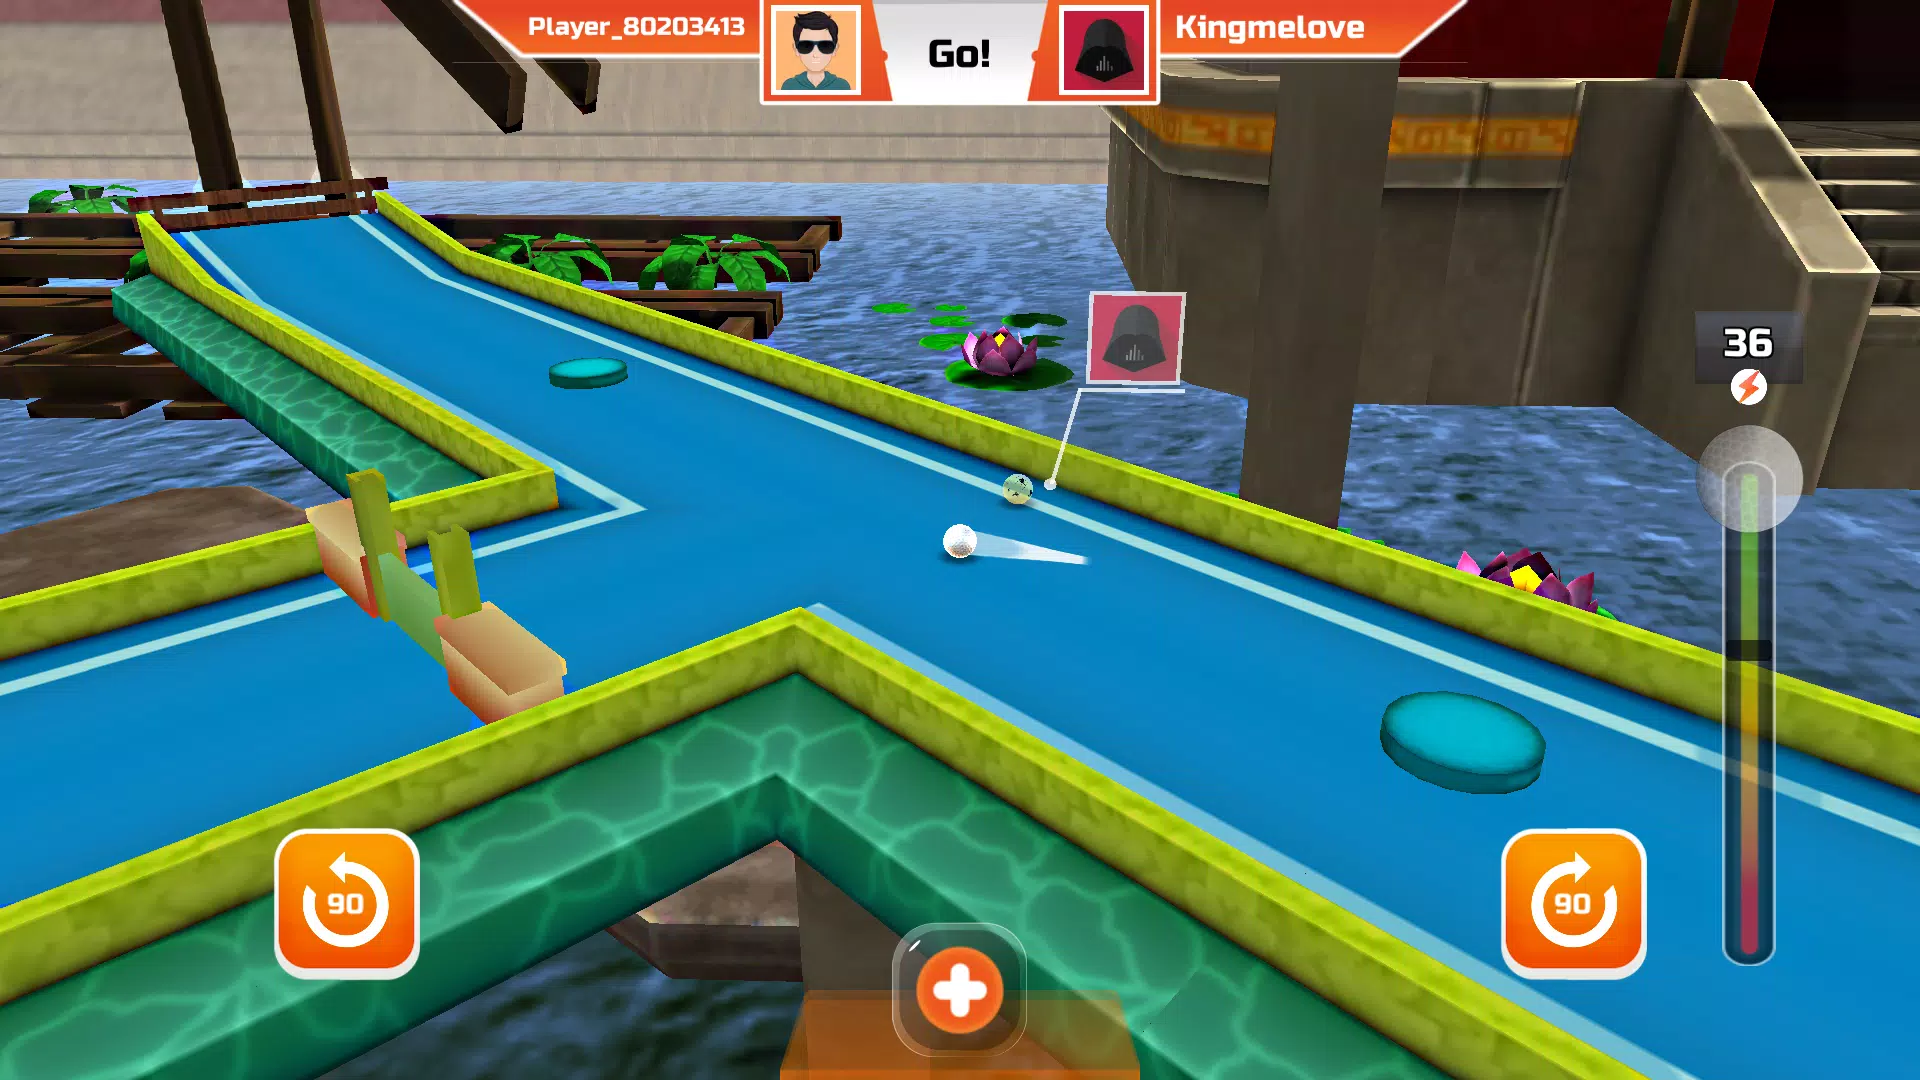 Mini Golf for Android - APK Download